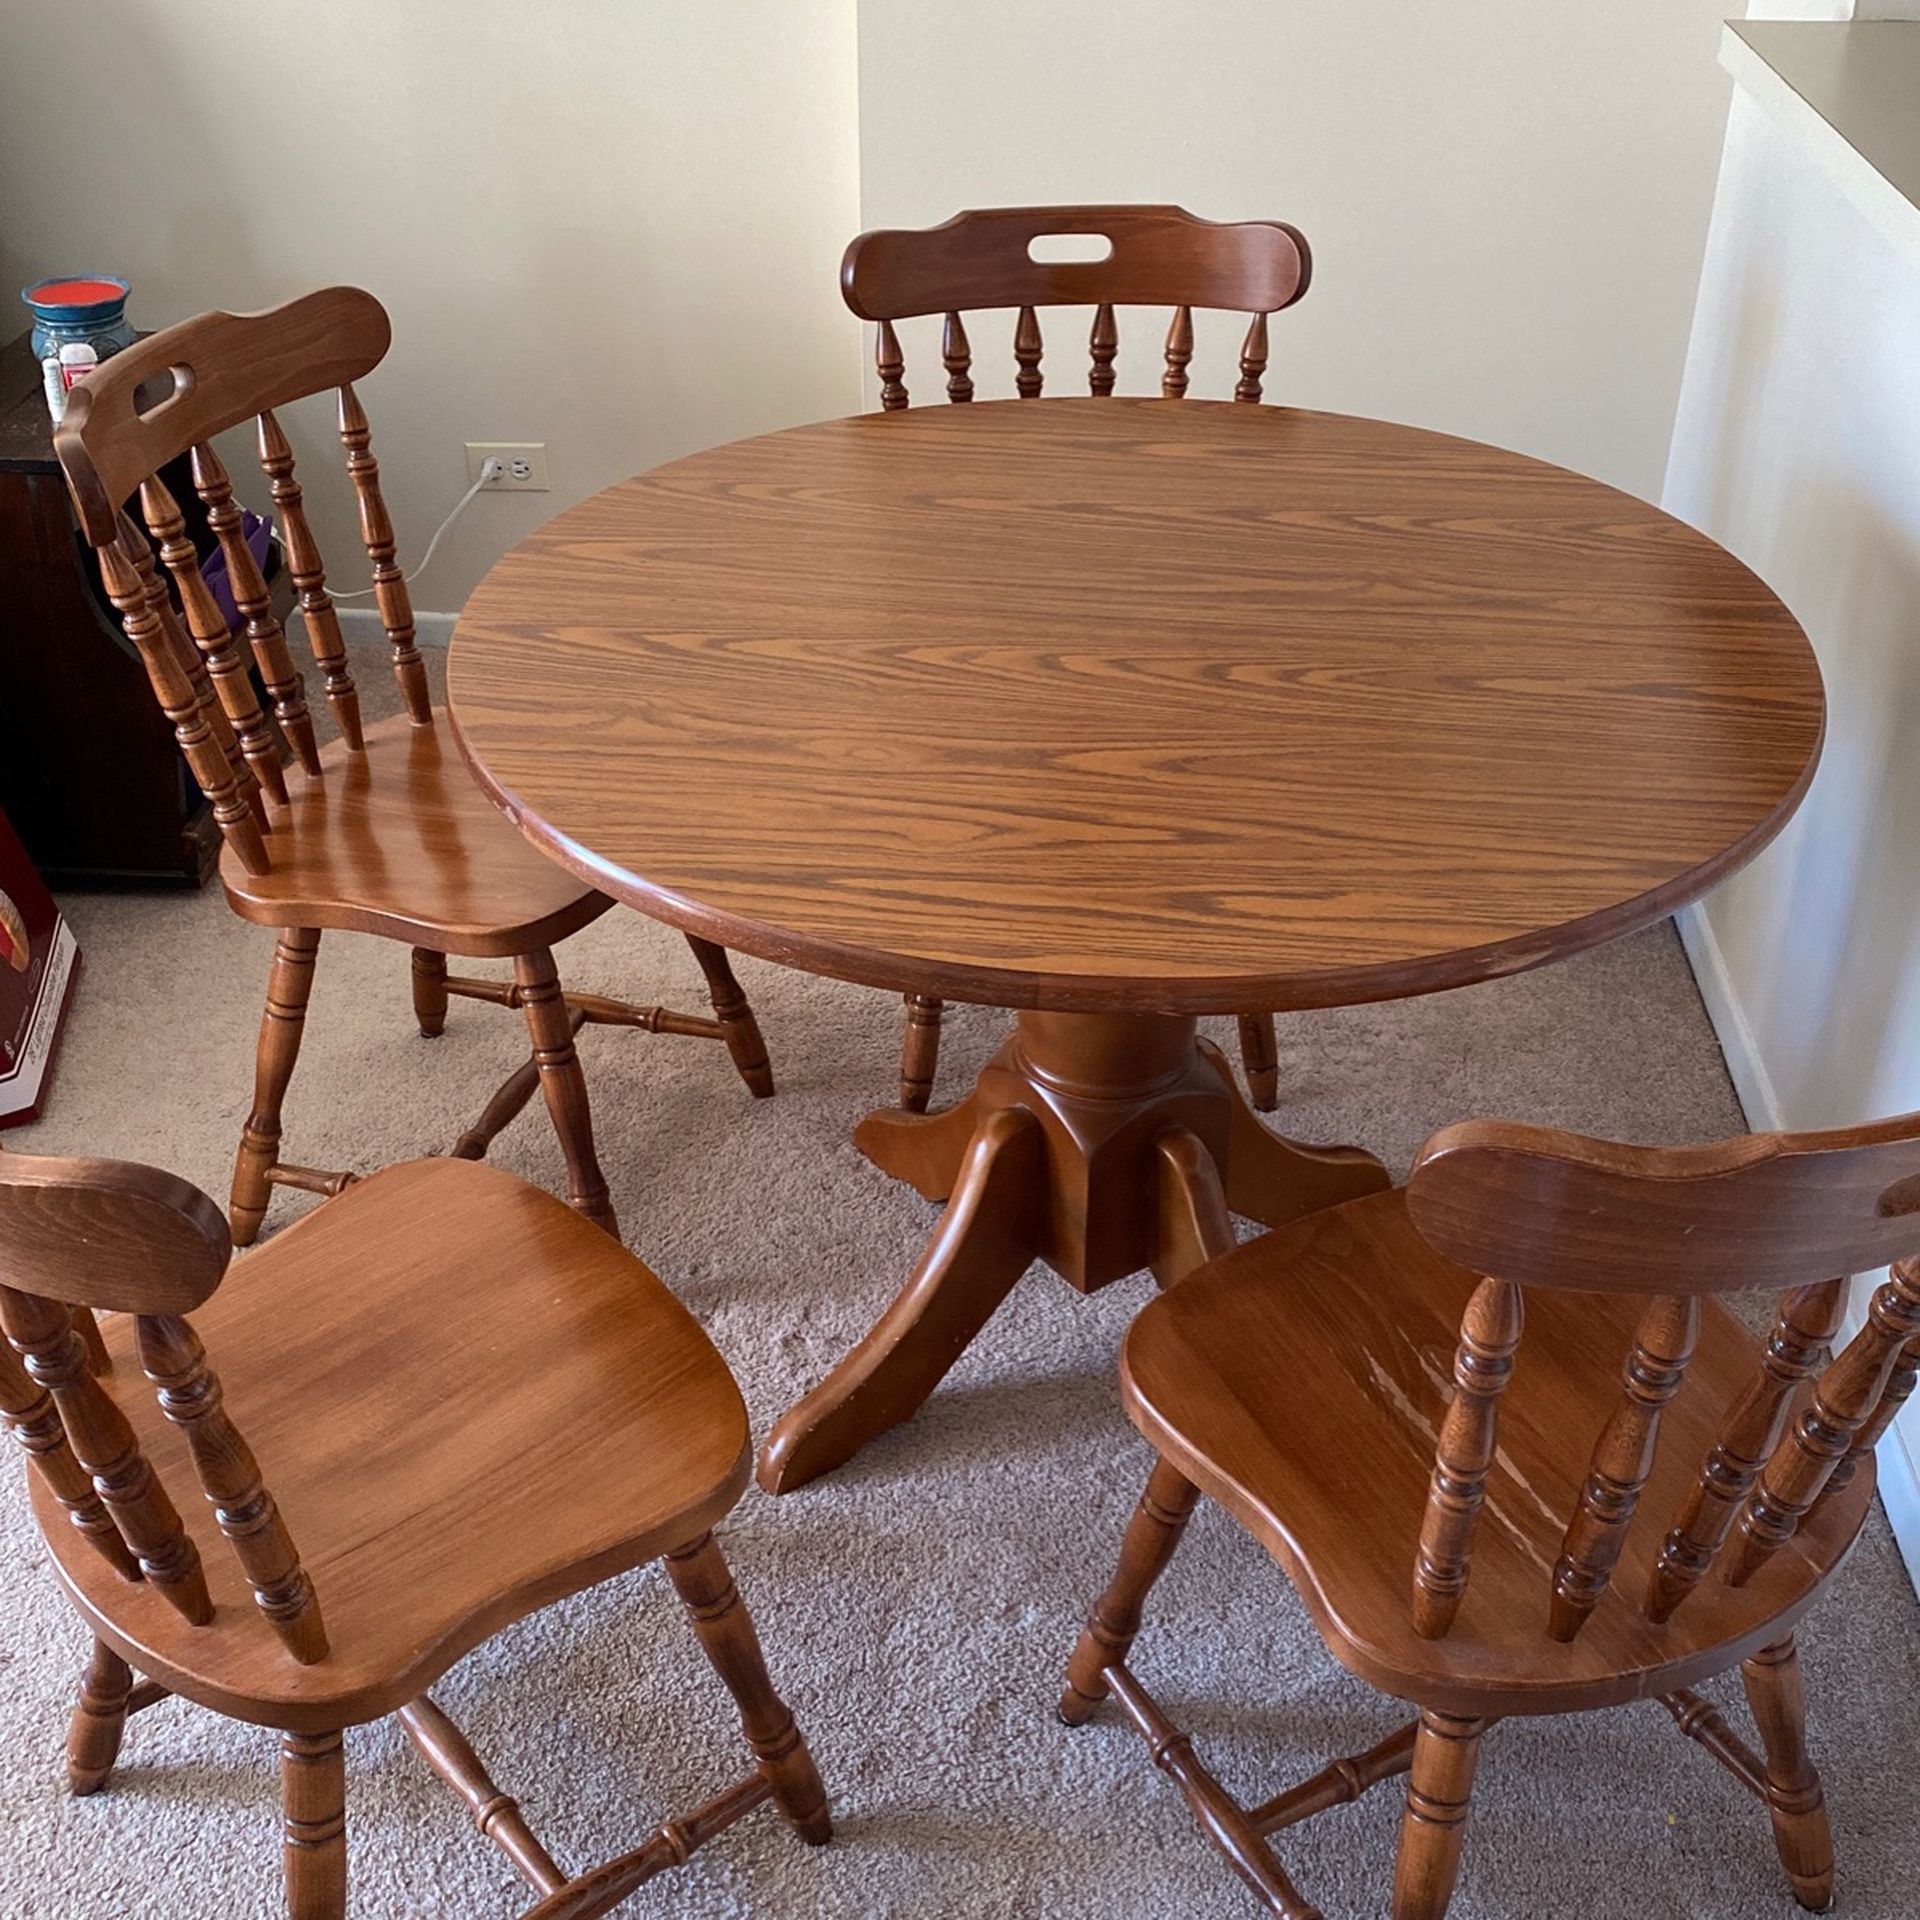 Wood Table With 4 Chairs - Great Condition!